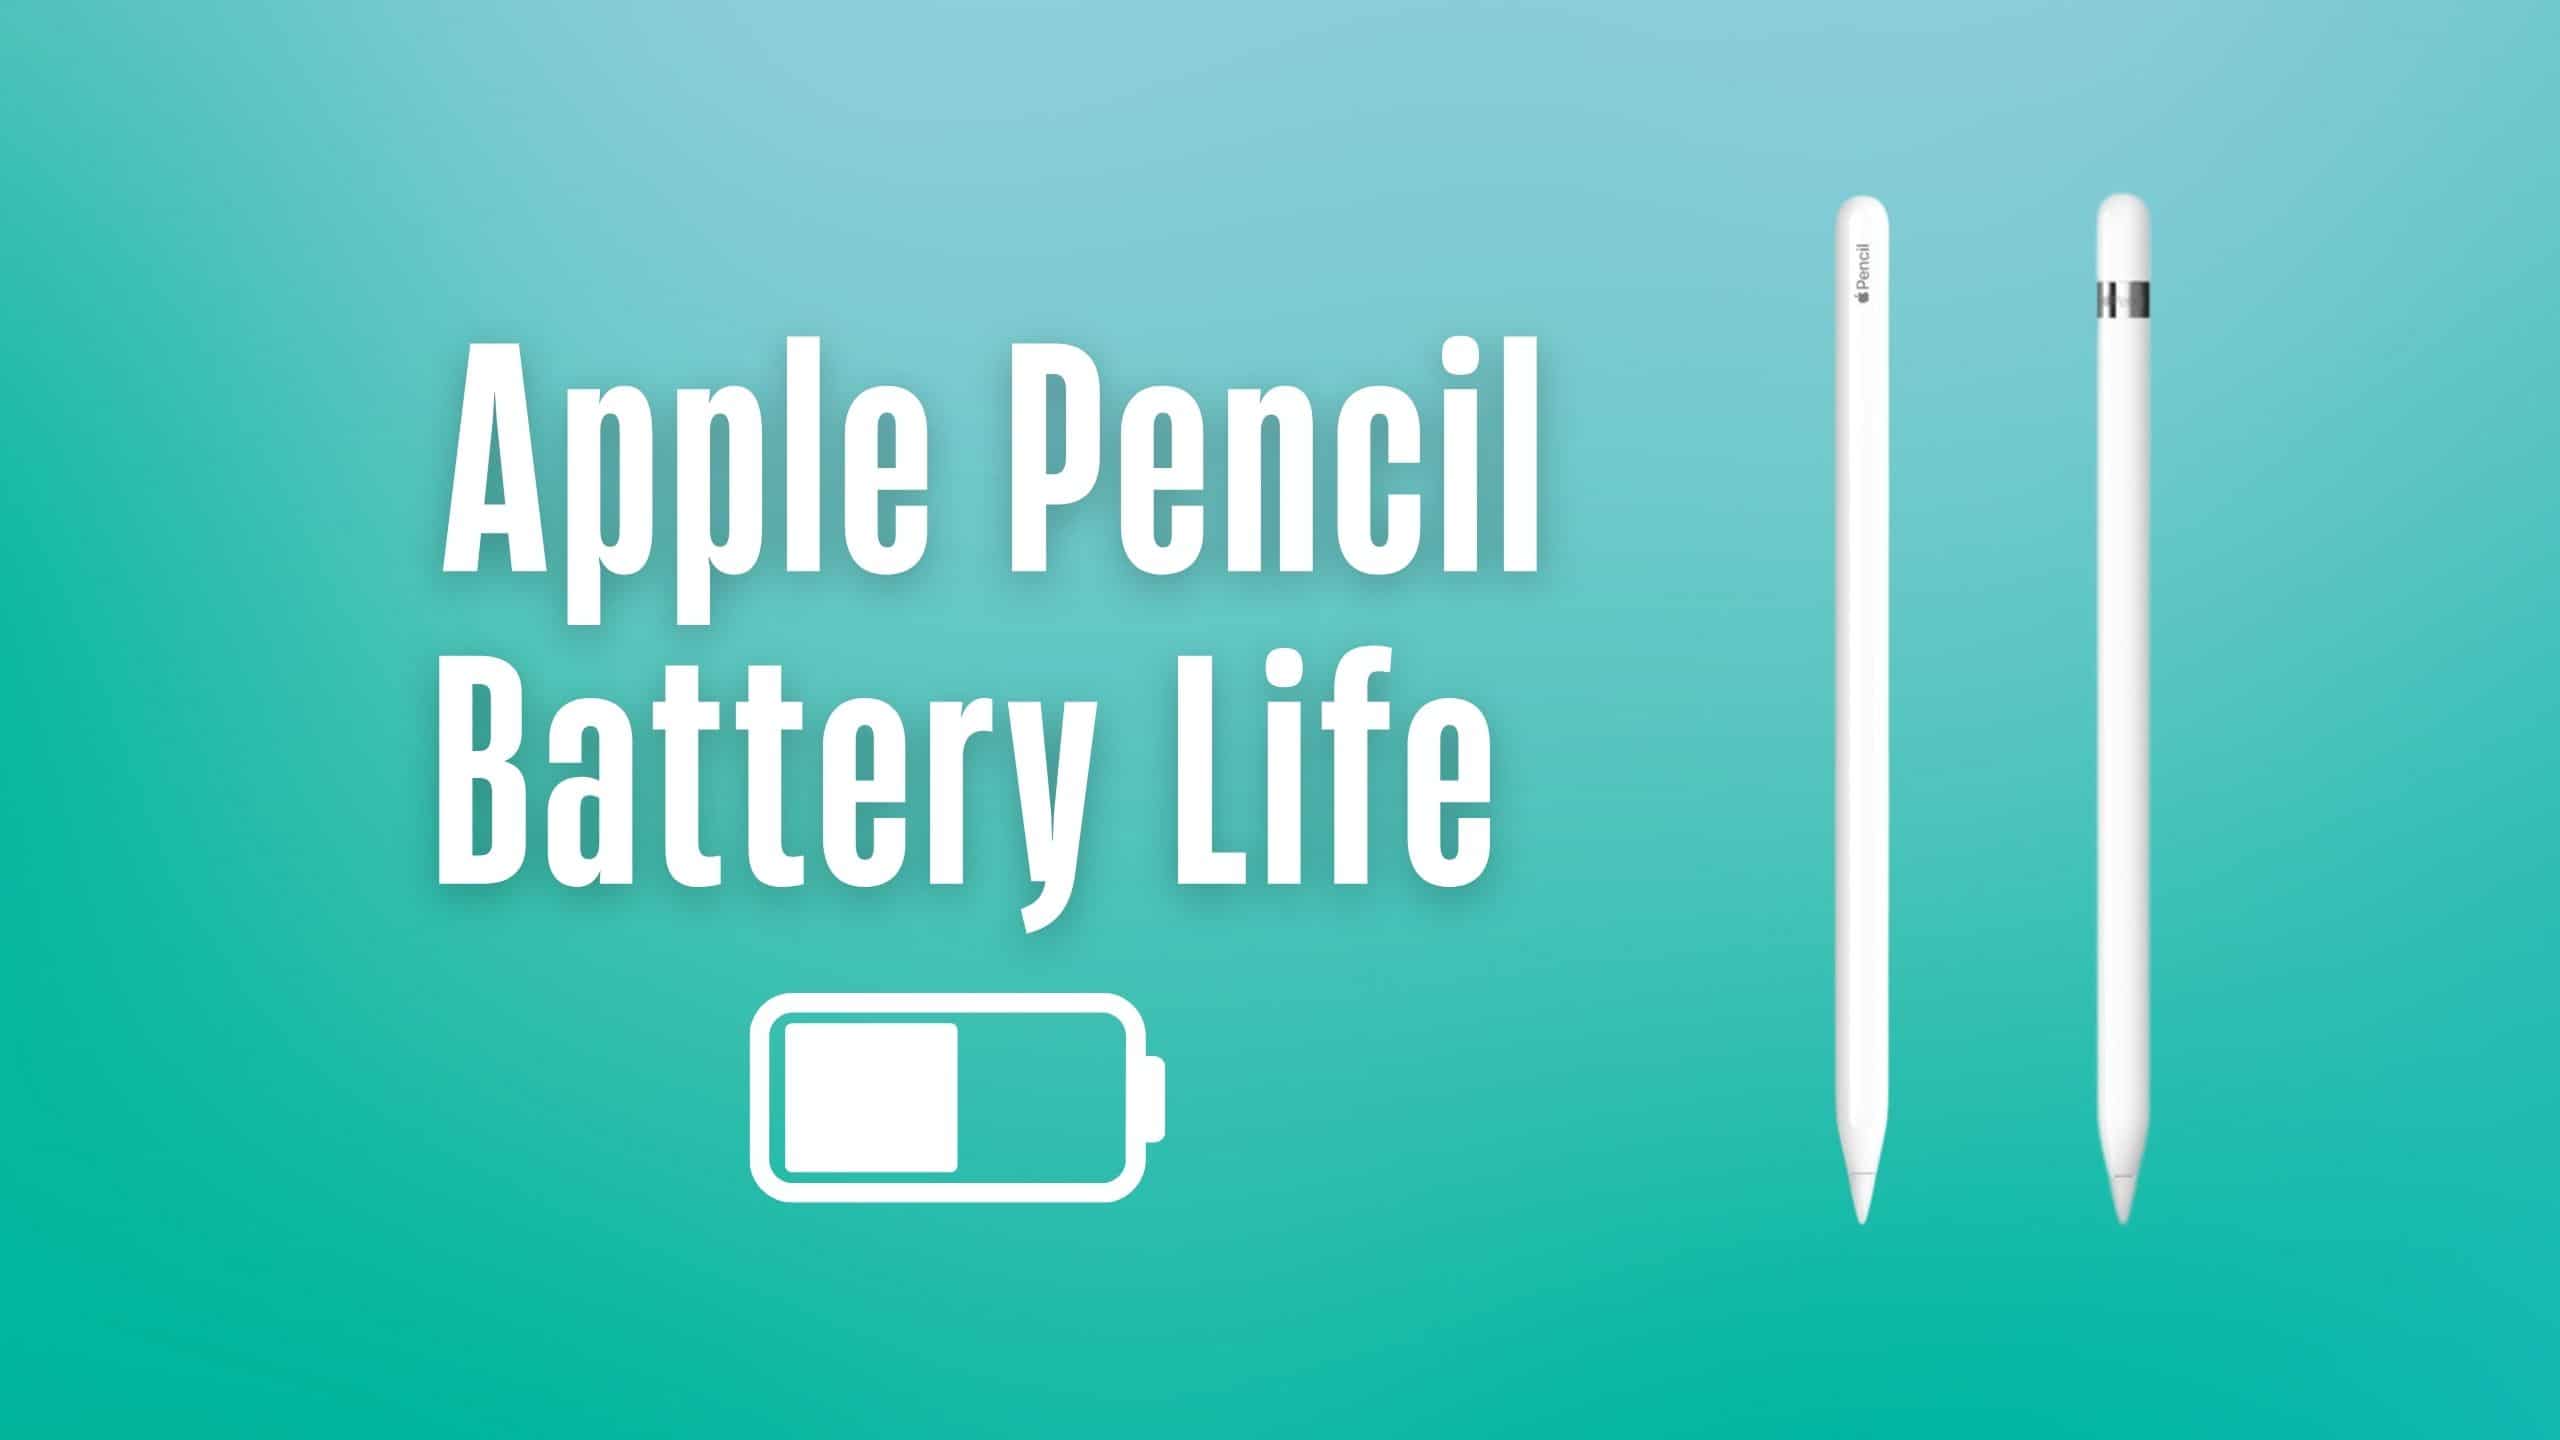 Does Apple Pencil lose battery when not used?